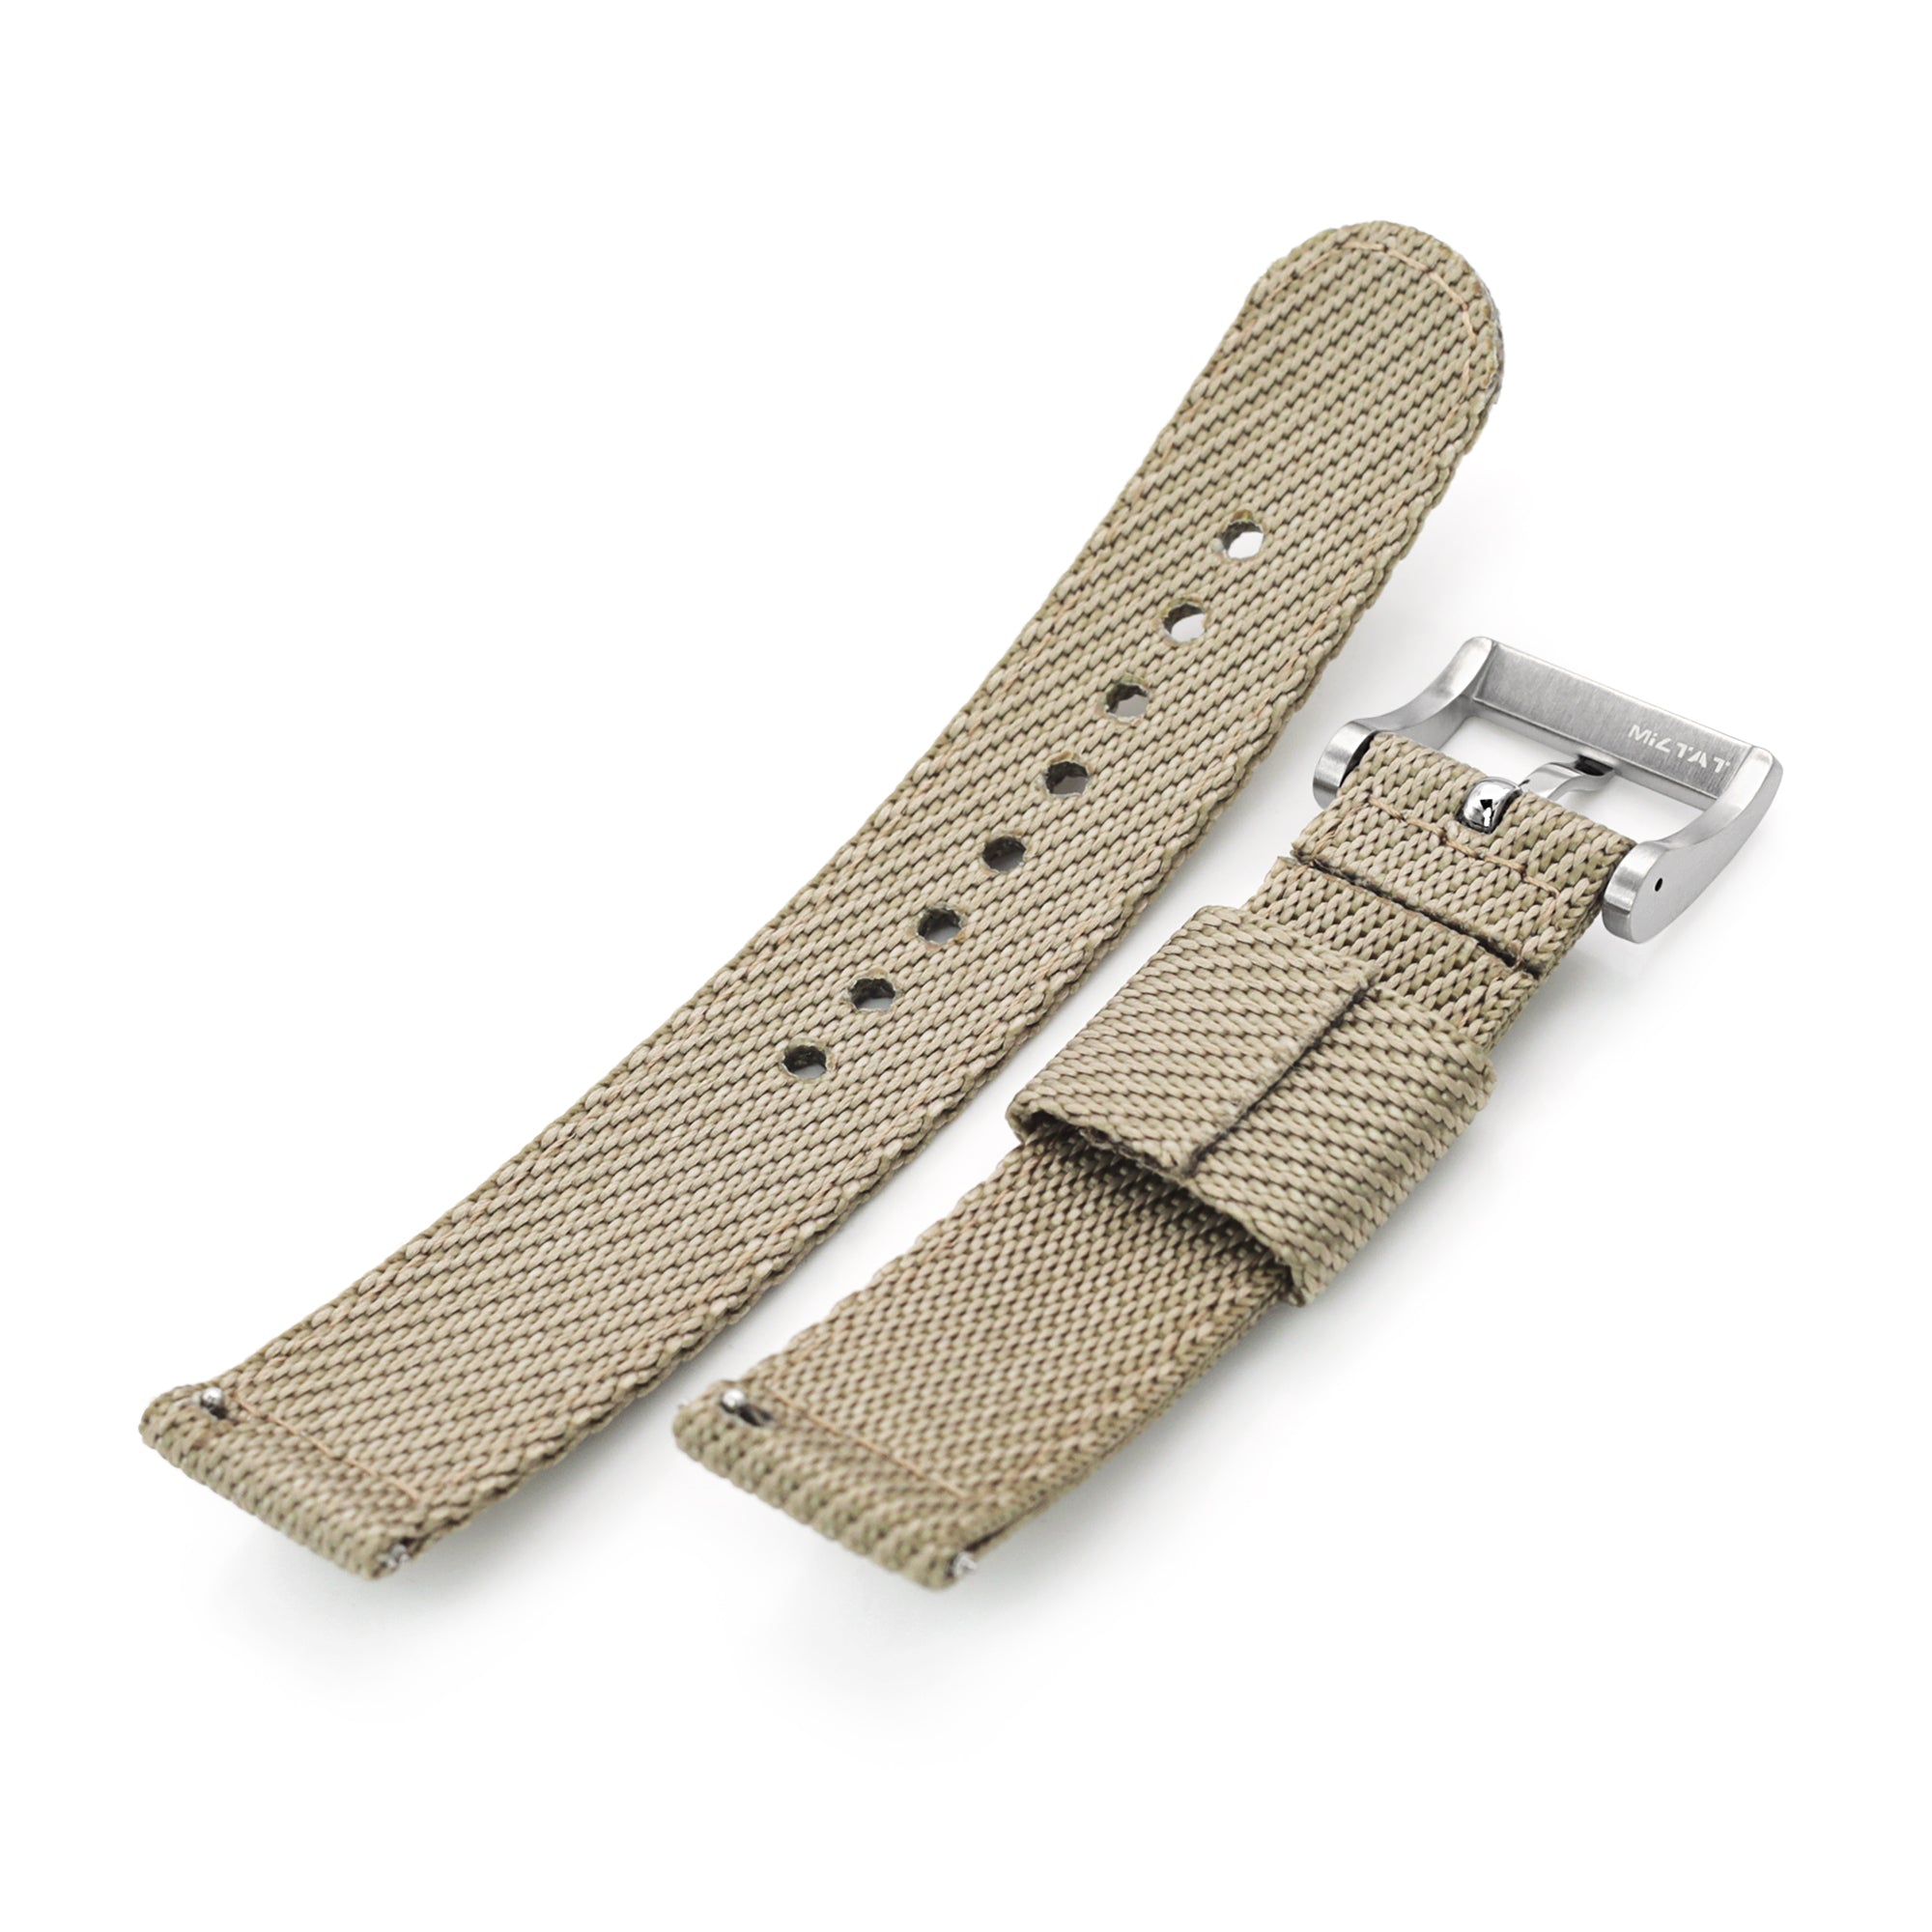 2-pcs Nylon Watch Band, Khaki, Quick Release, Polished Buckle Strapcode Watch Bands